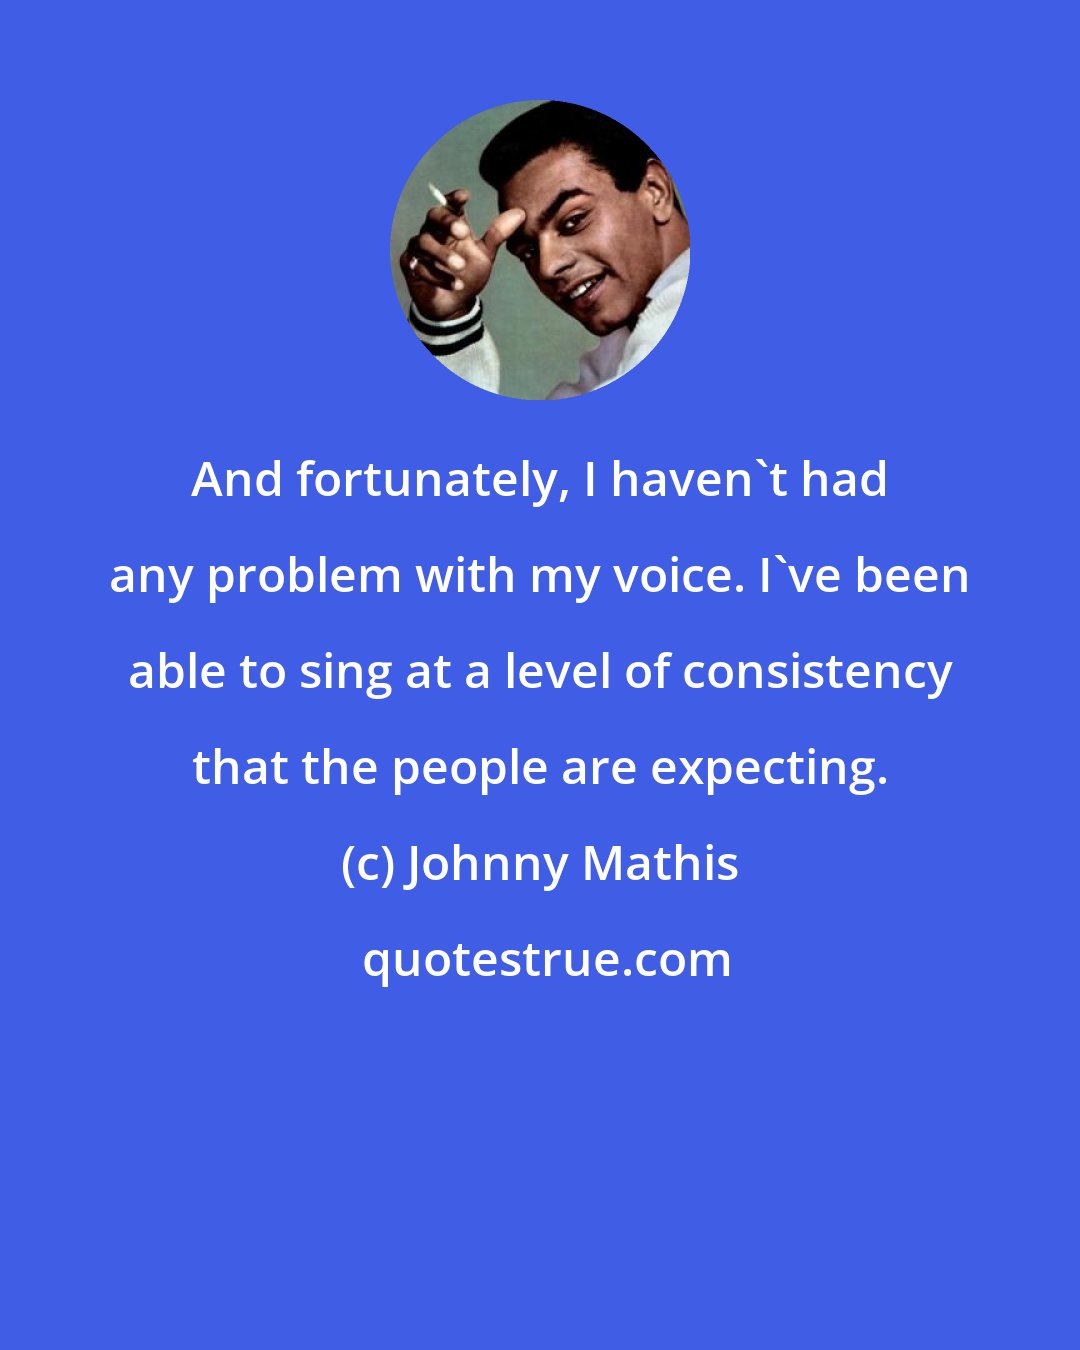 Johnny Mathis: And fortunately, I haven't had any problem with my voice. I've been able to sing at a level of consistency that the people are expecting.